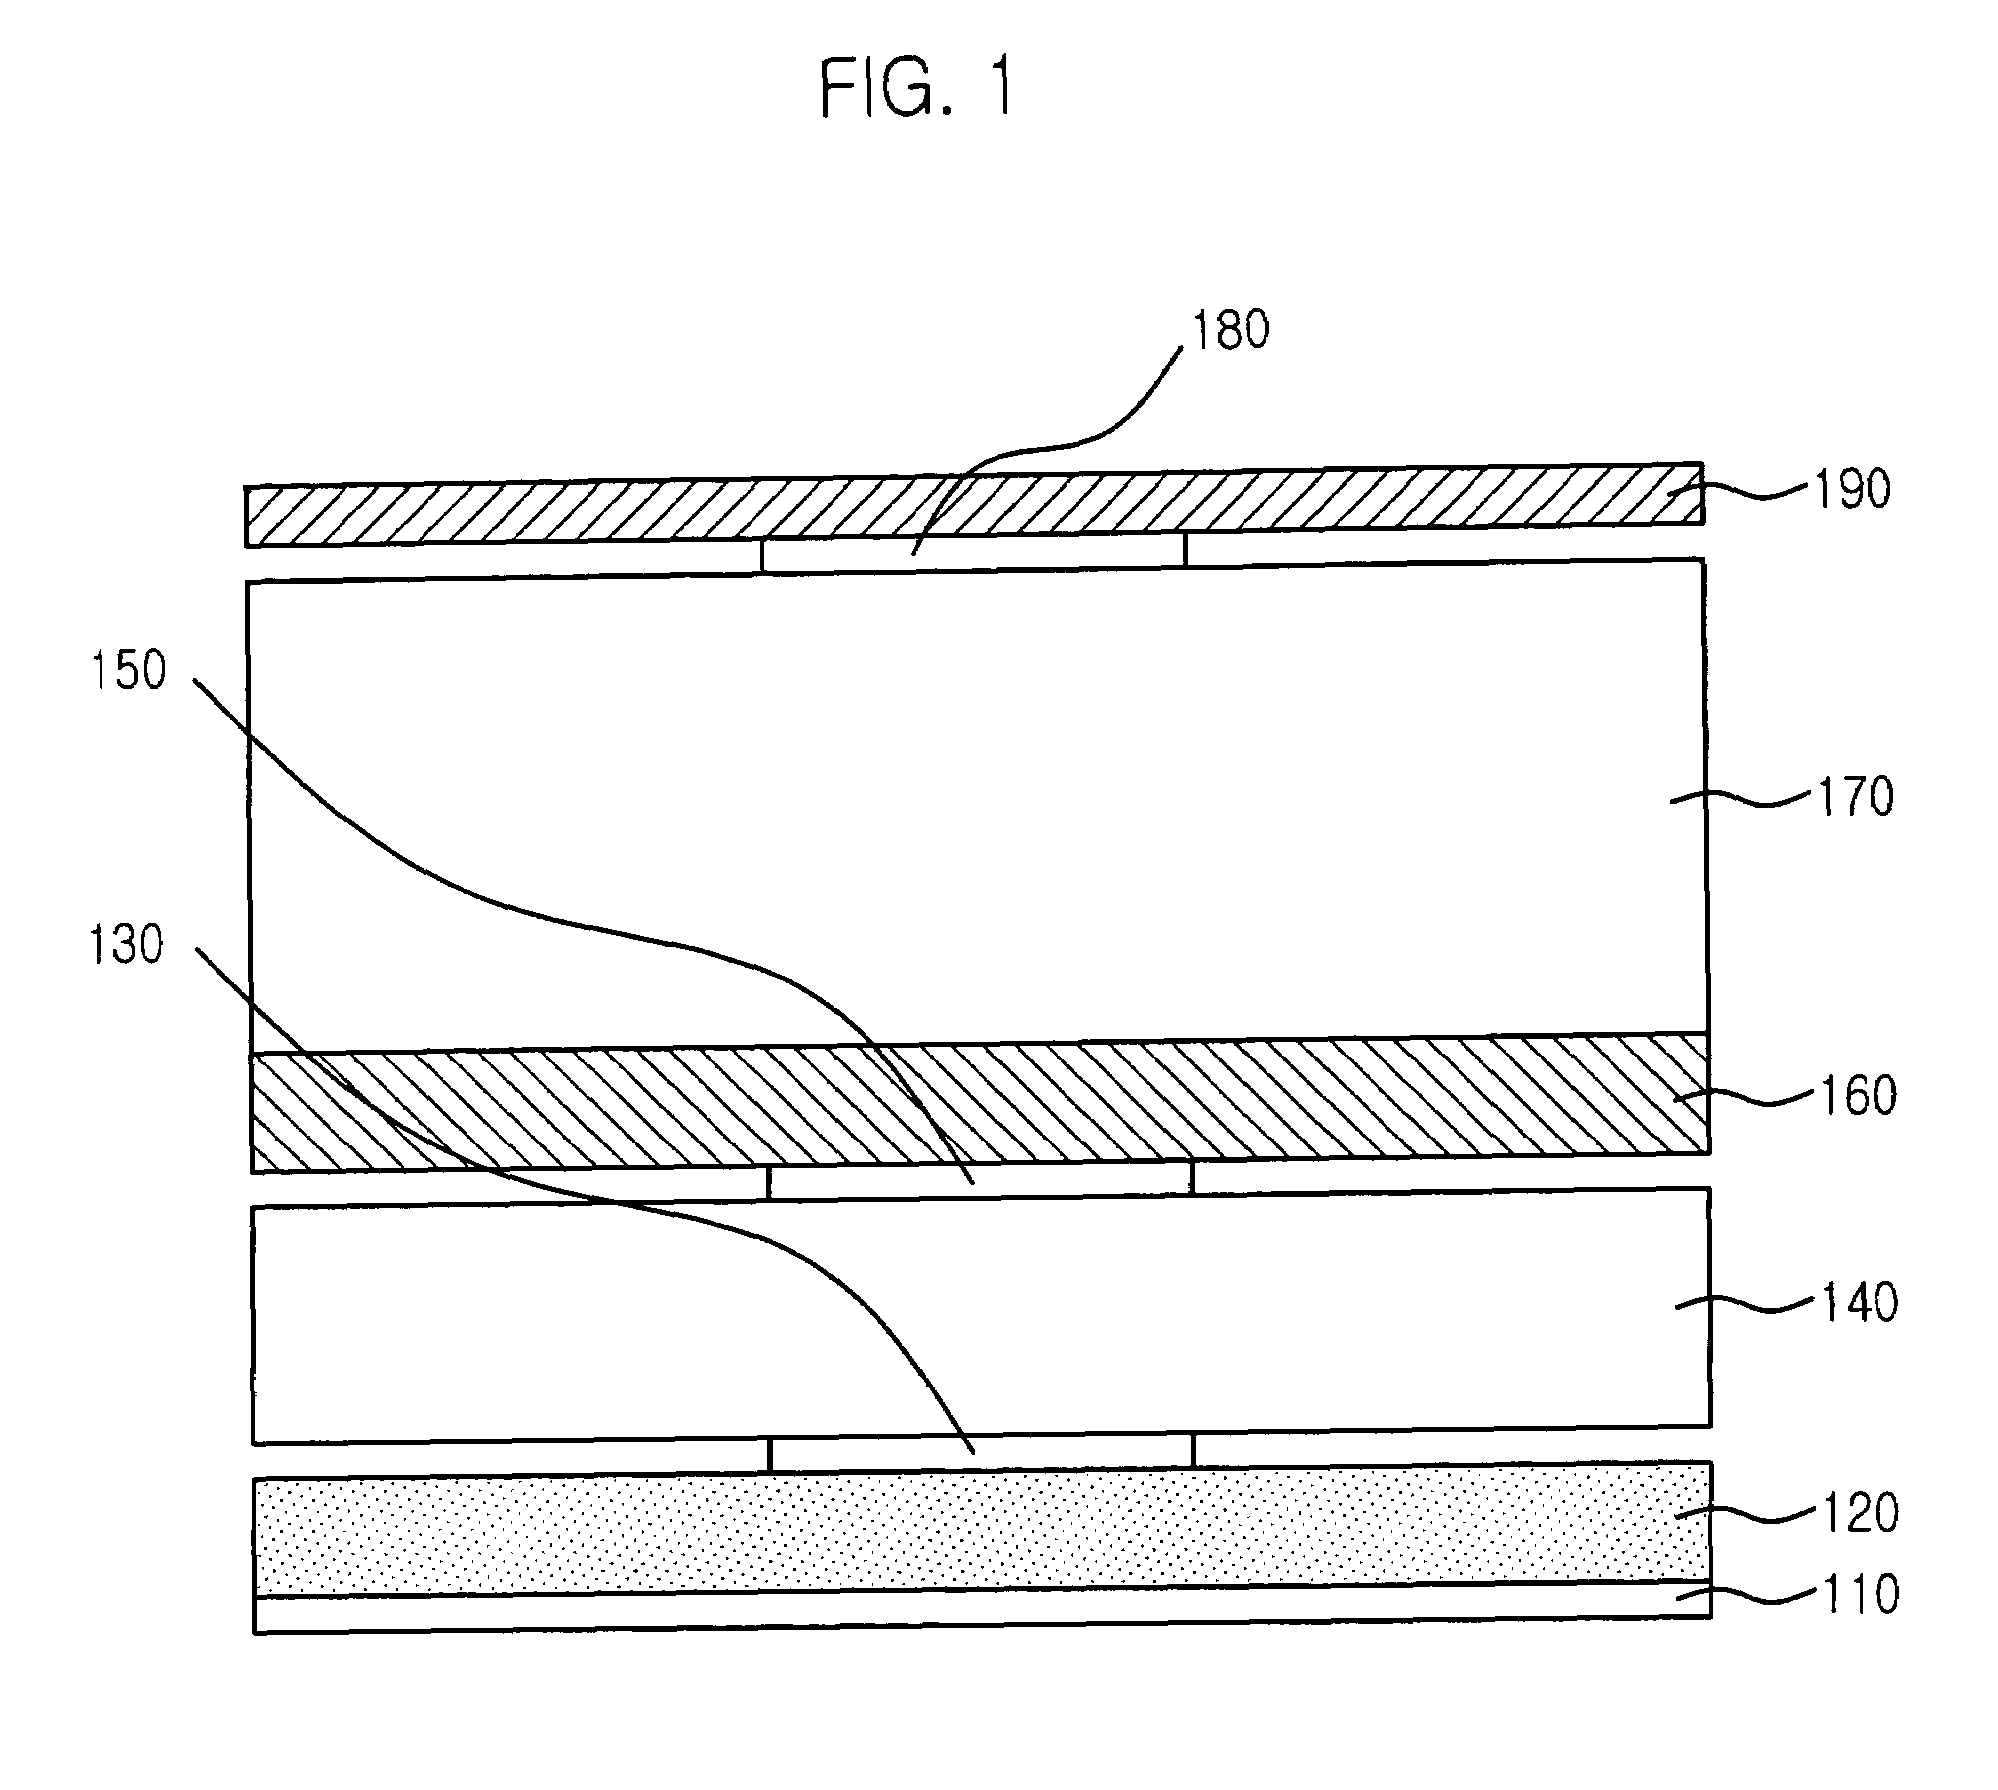 Microstrip patch antenna having high gain and wideband